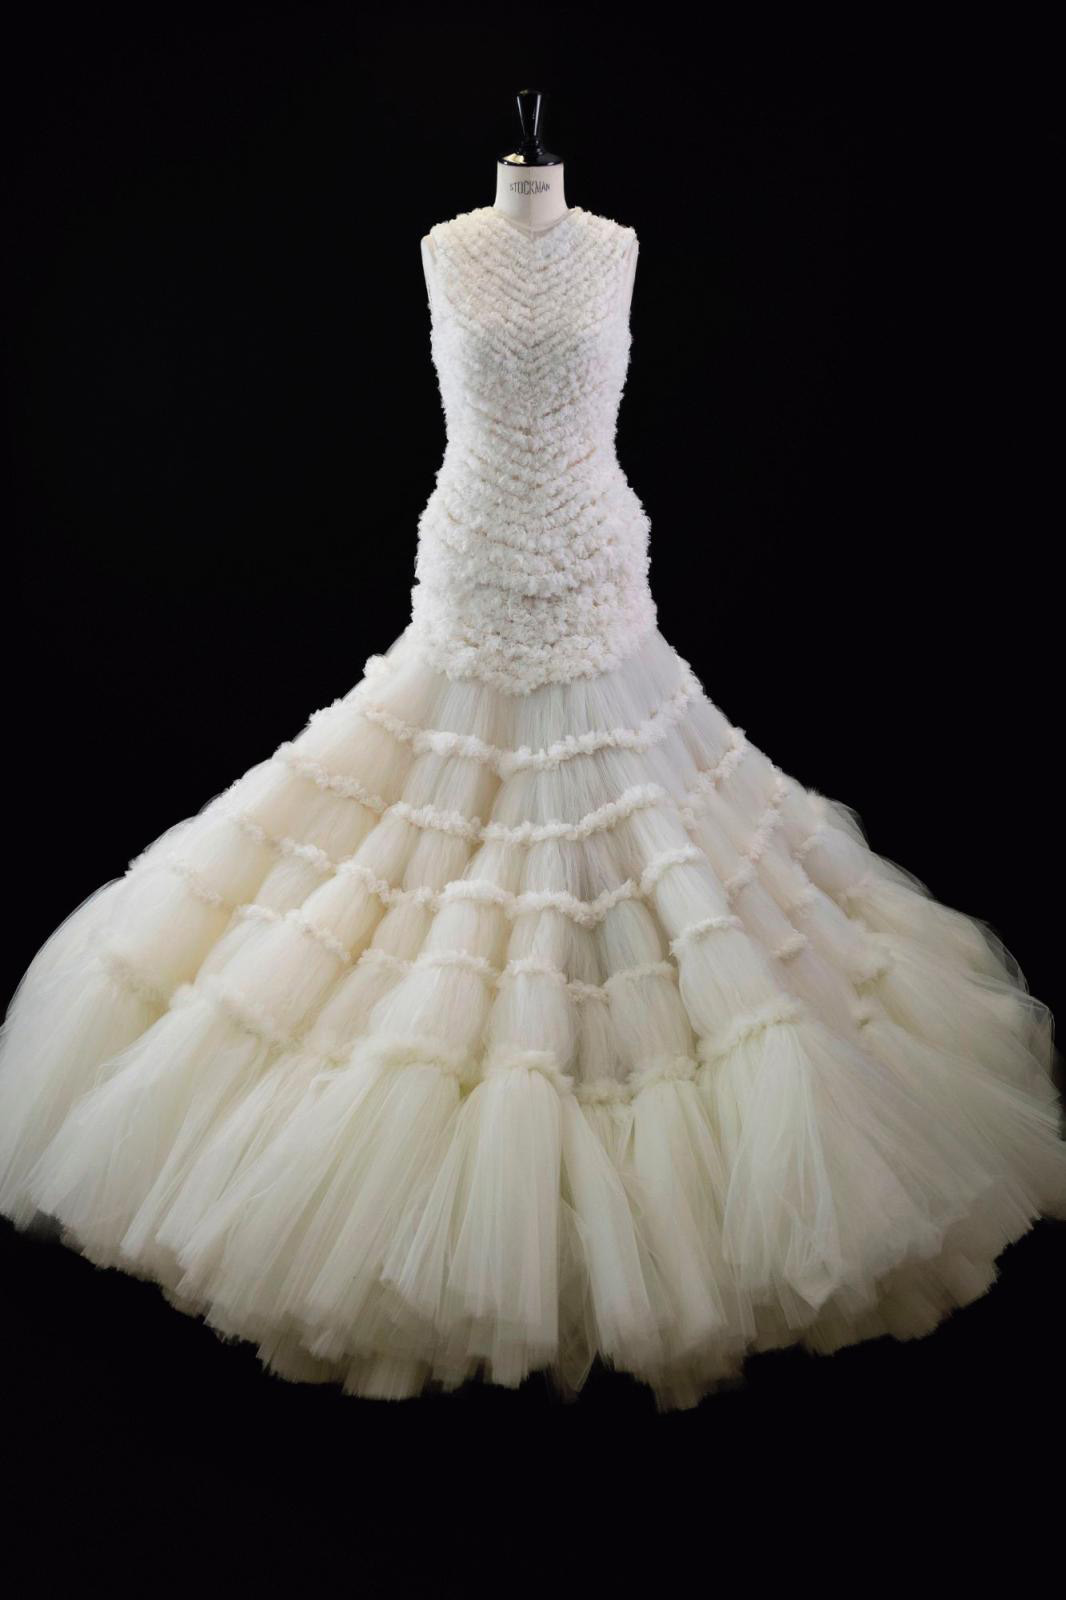 A Restructured Bridal Gown